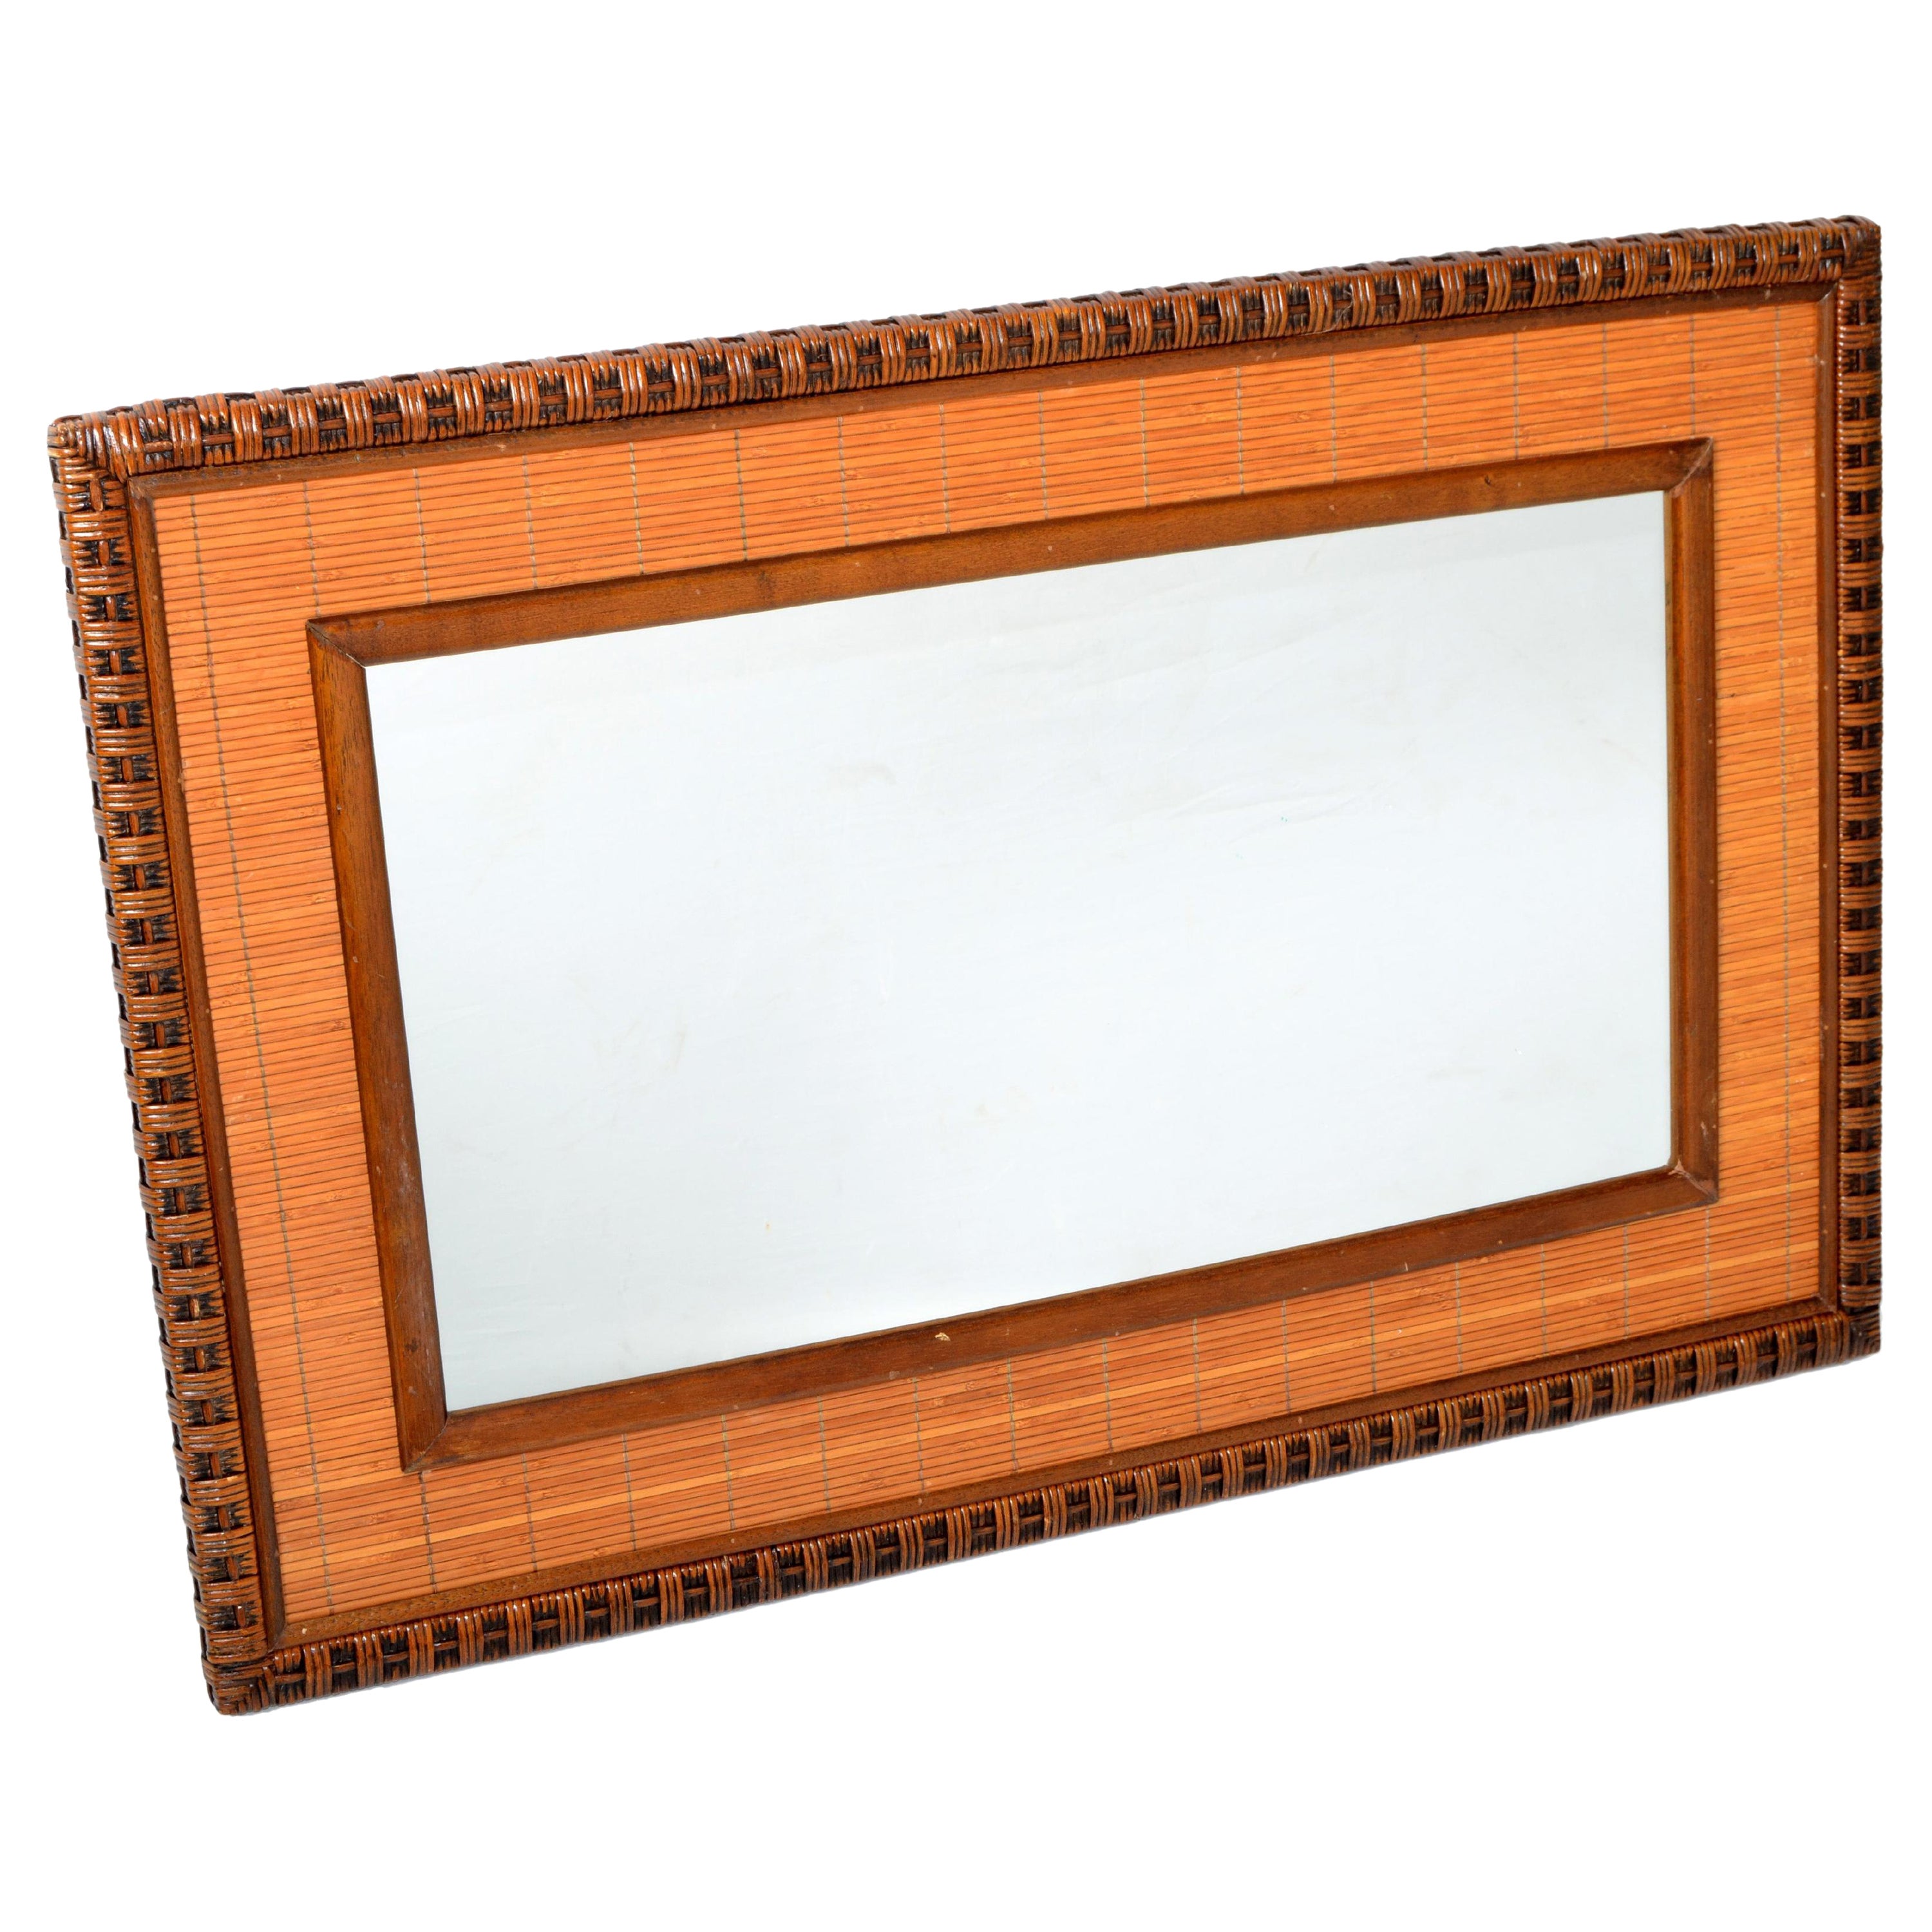 Rectangle Mid-Century Modern Handwoven Rattan Wicker Wall Mirror Boho Chic 1979 For Sale